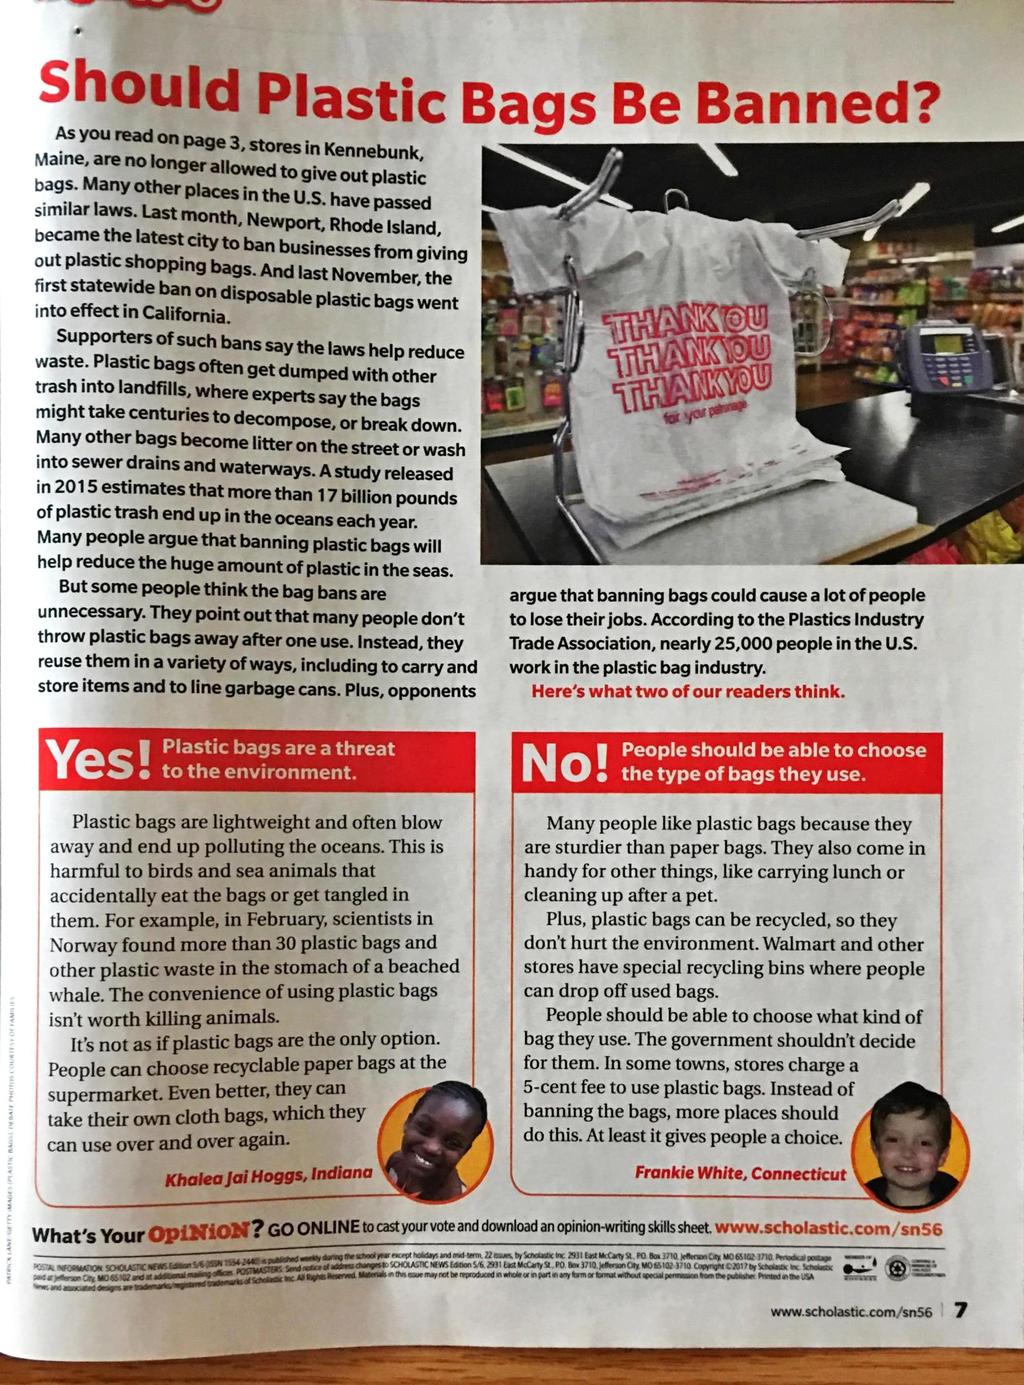 Should Plastic Bags Be Banned? As you read on page 3, stores in Kennebunk, Maine, are no longer allowed to give out plastic bags. Many other places in the U.S. have passed similar laws.